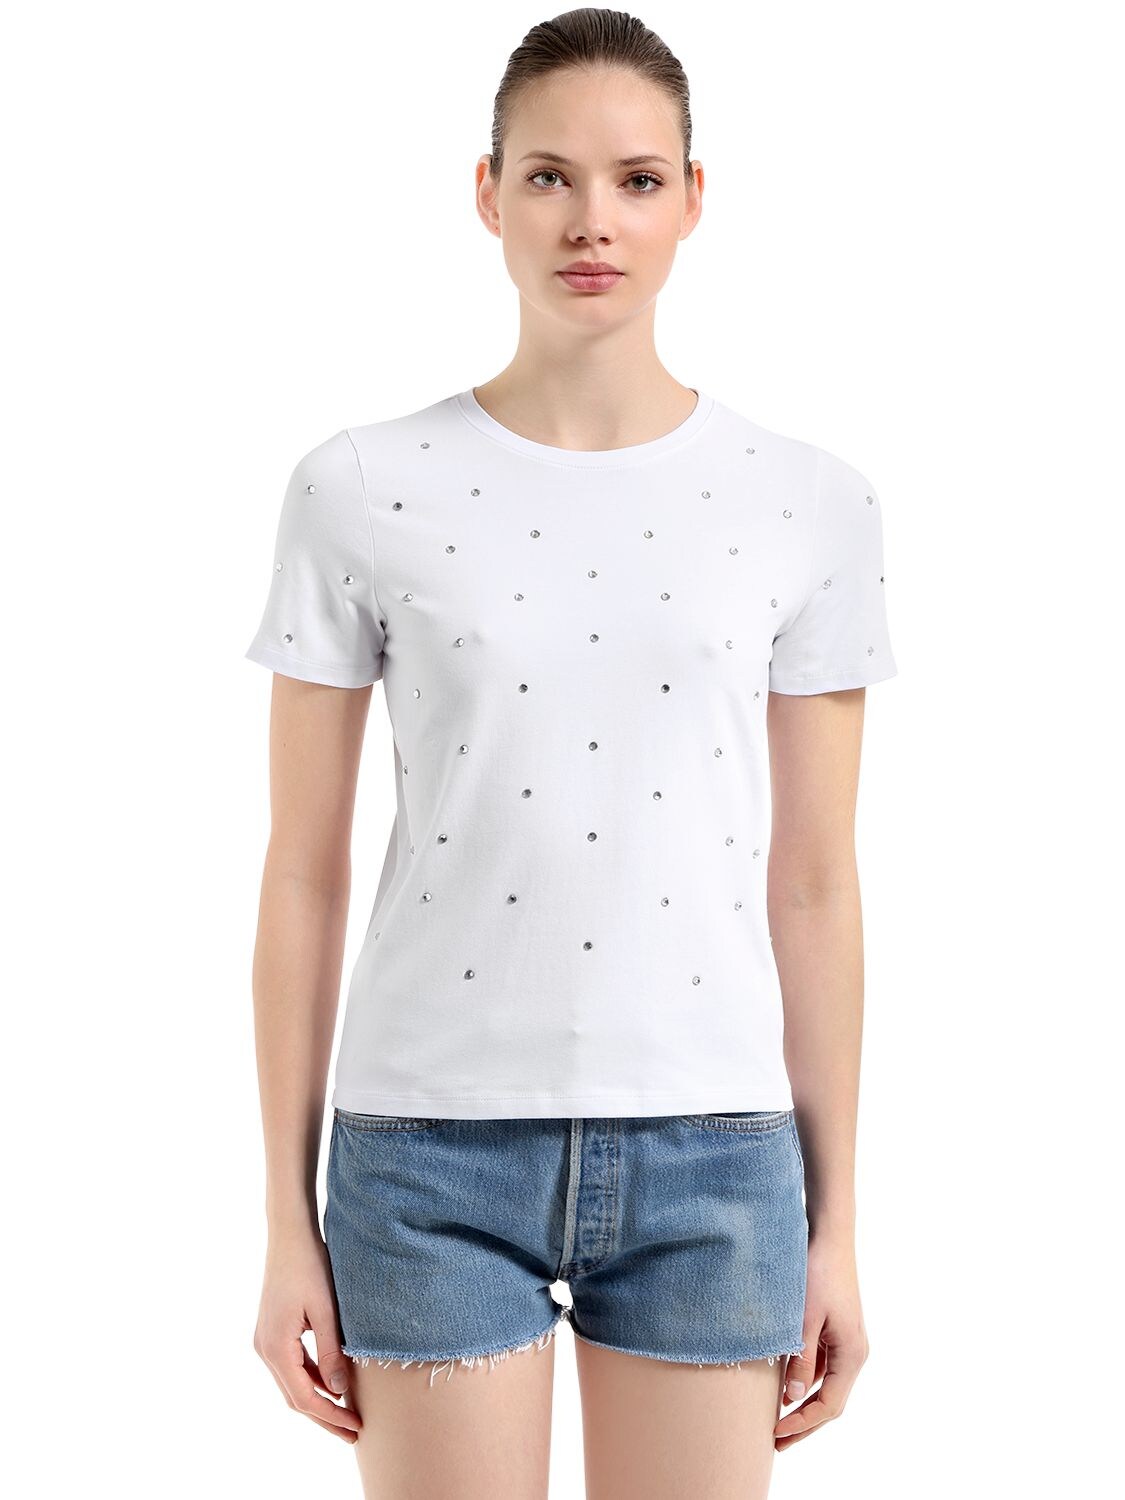 T.a.g.g. Slim Fit Embellished Jersey T-shirt In White